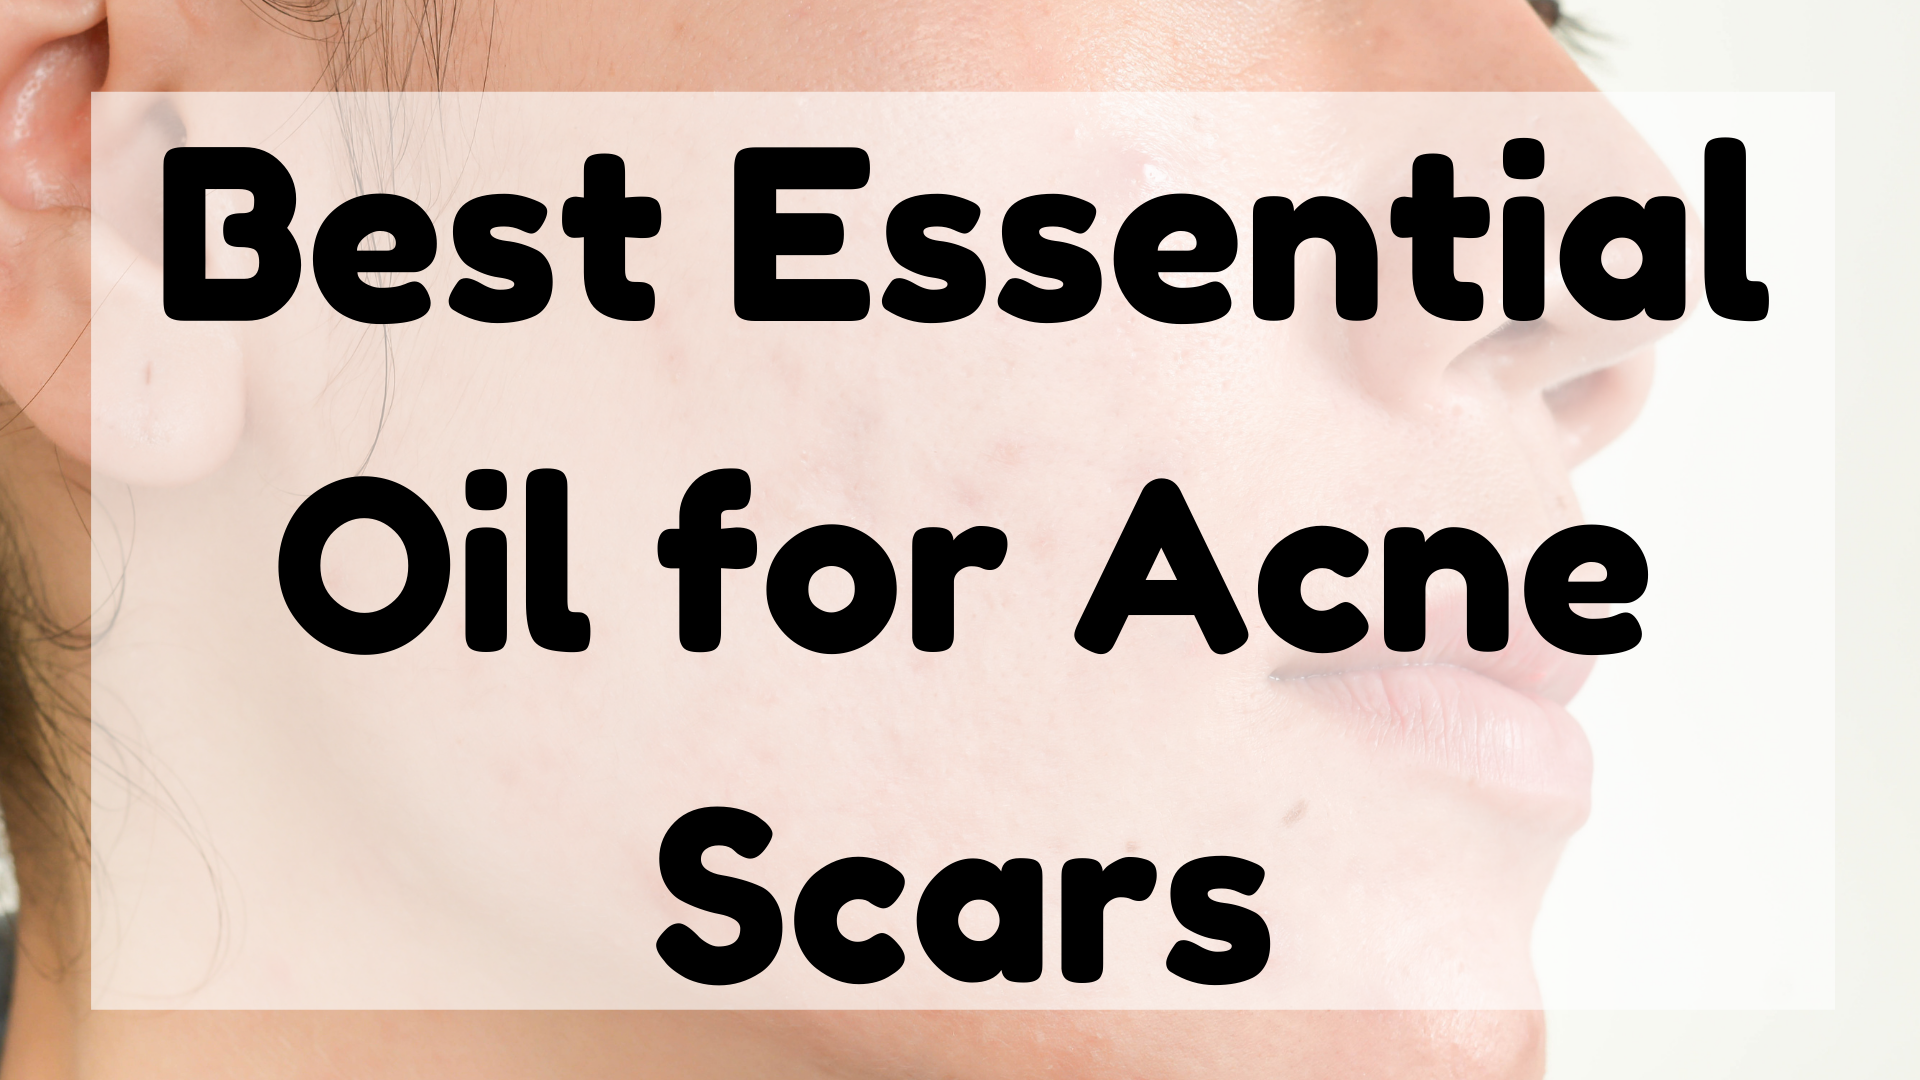 Essential Oil For Acne Scars